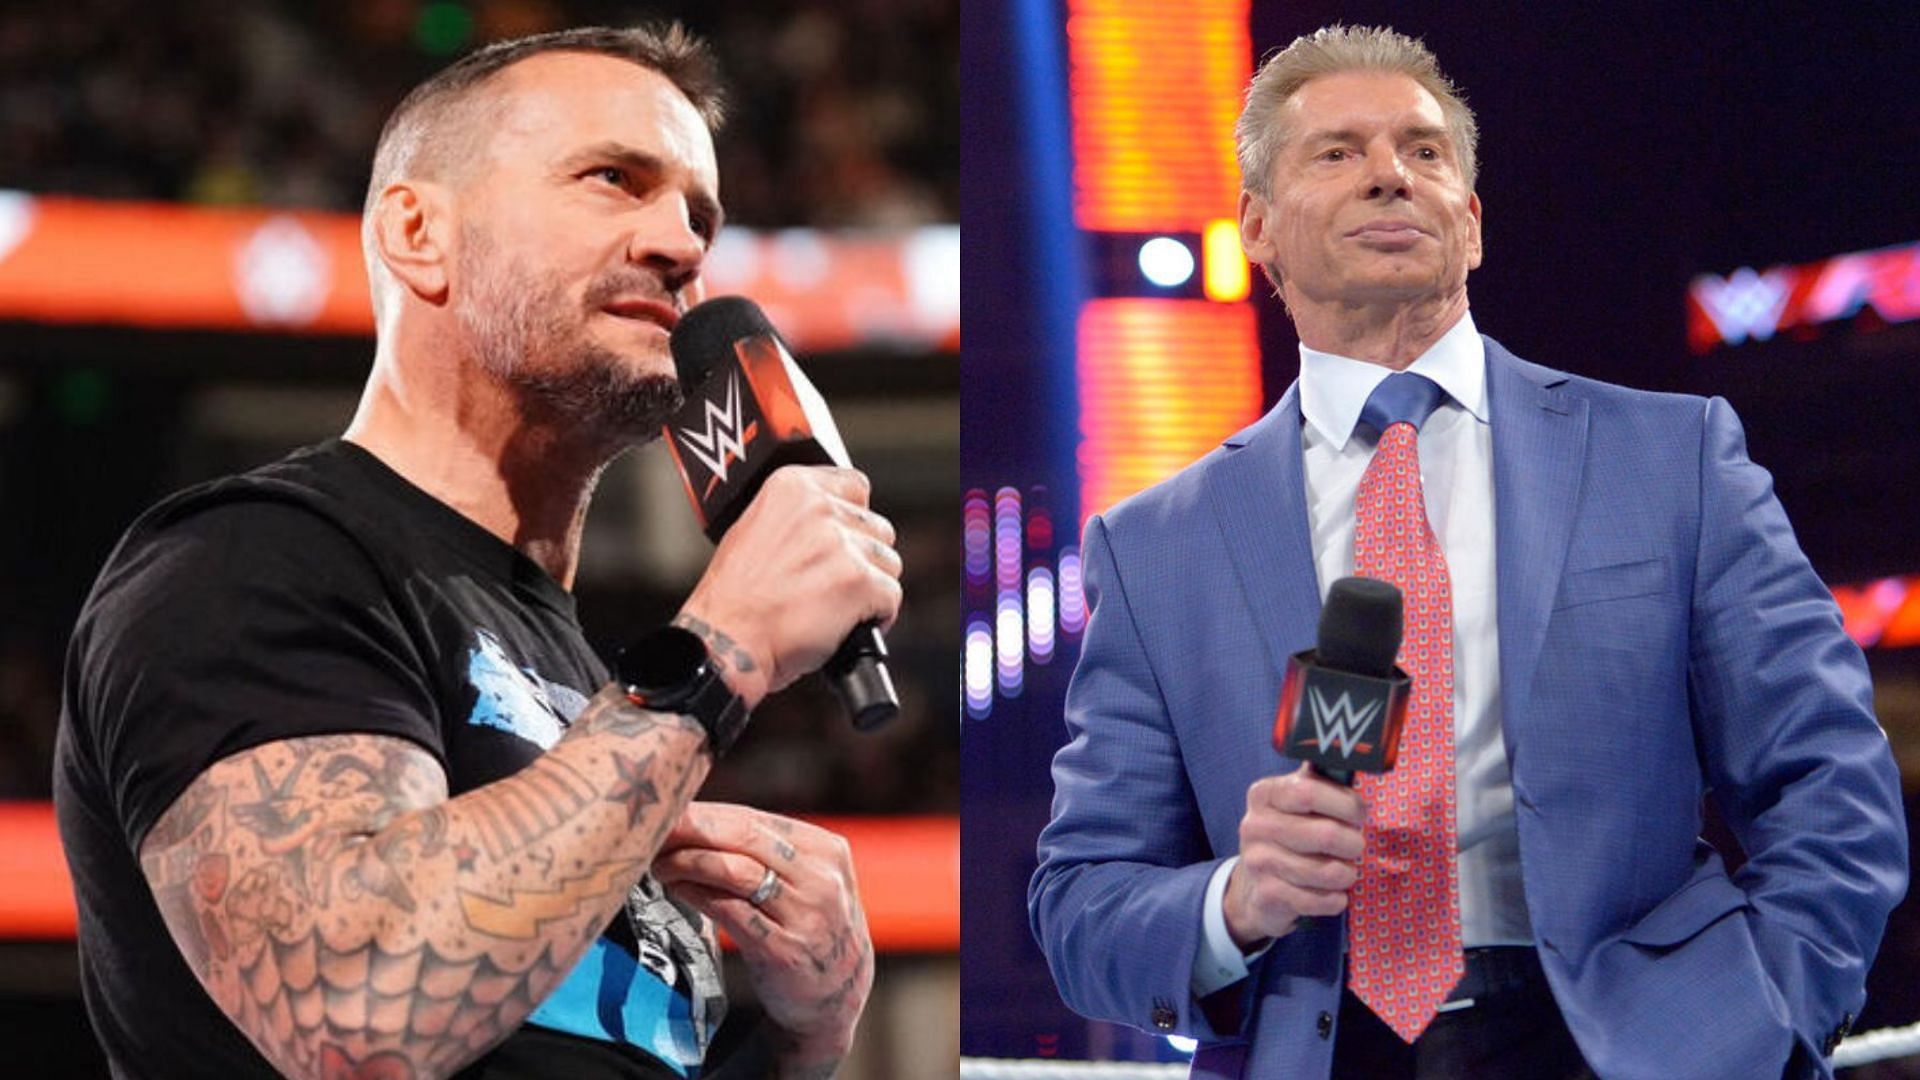 Punk returned to RAW this past Monday night.